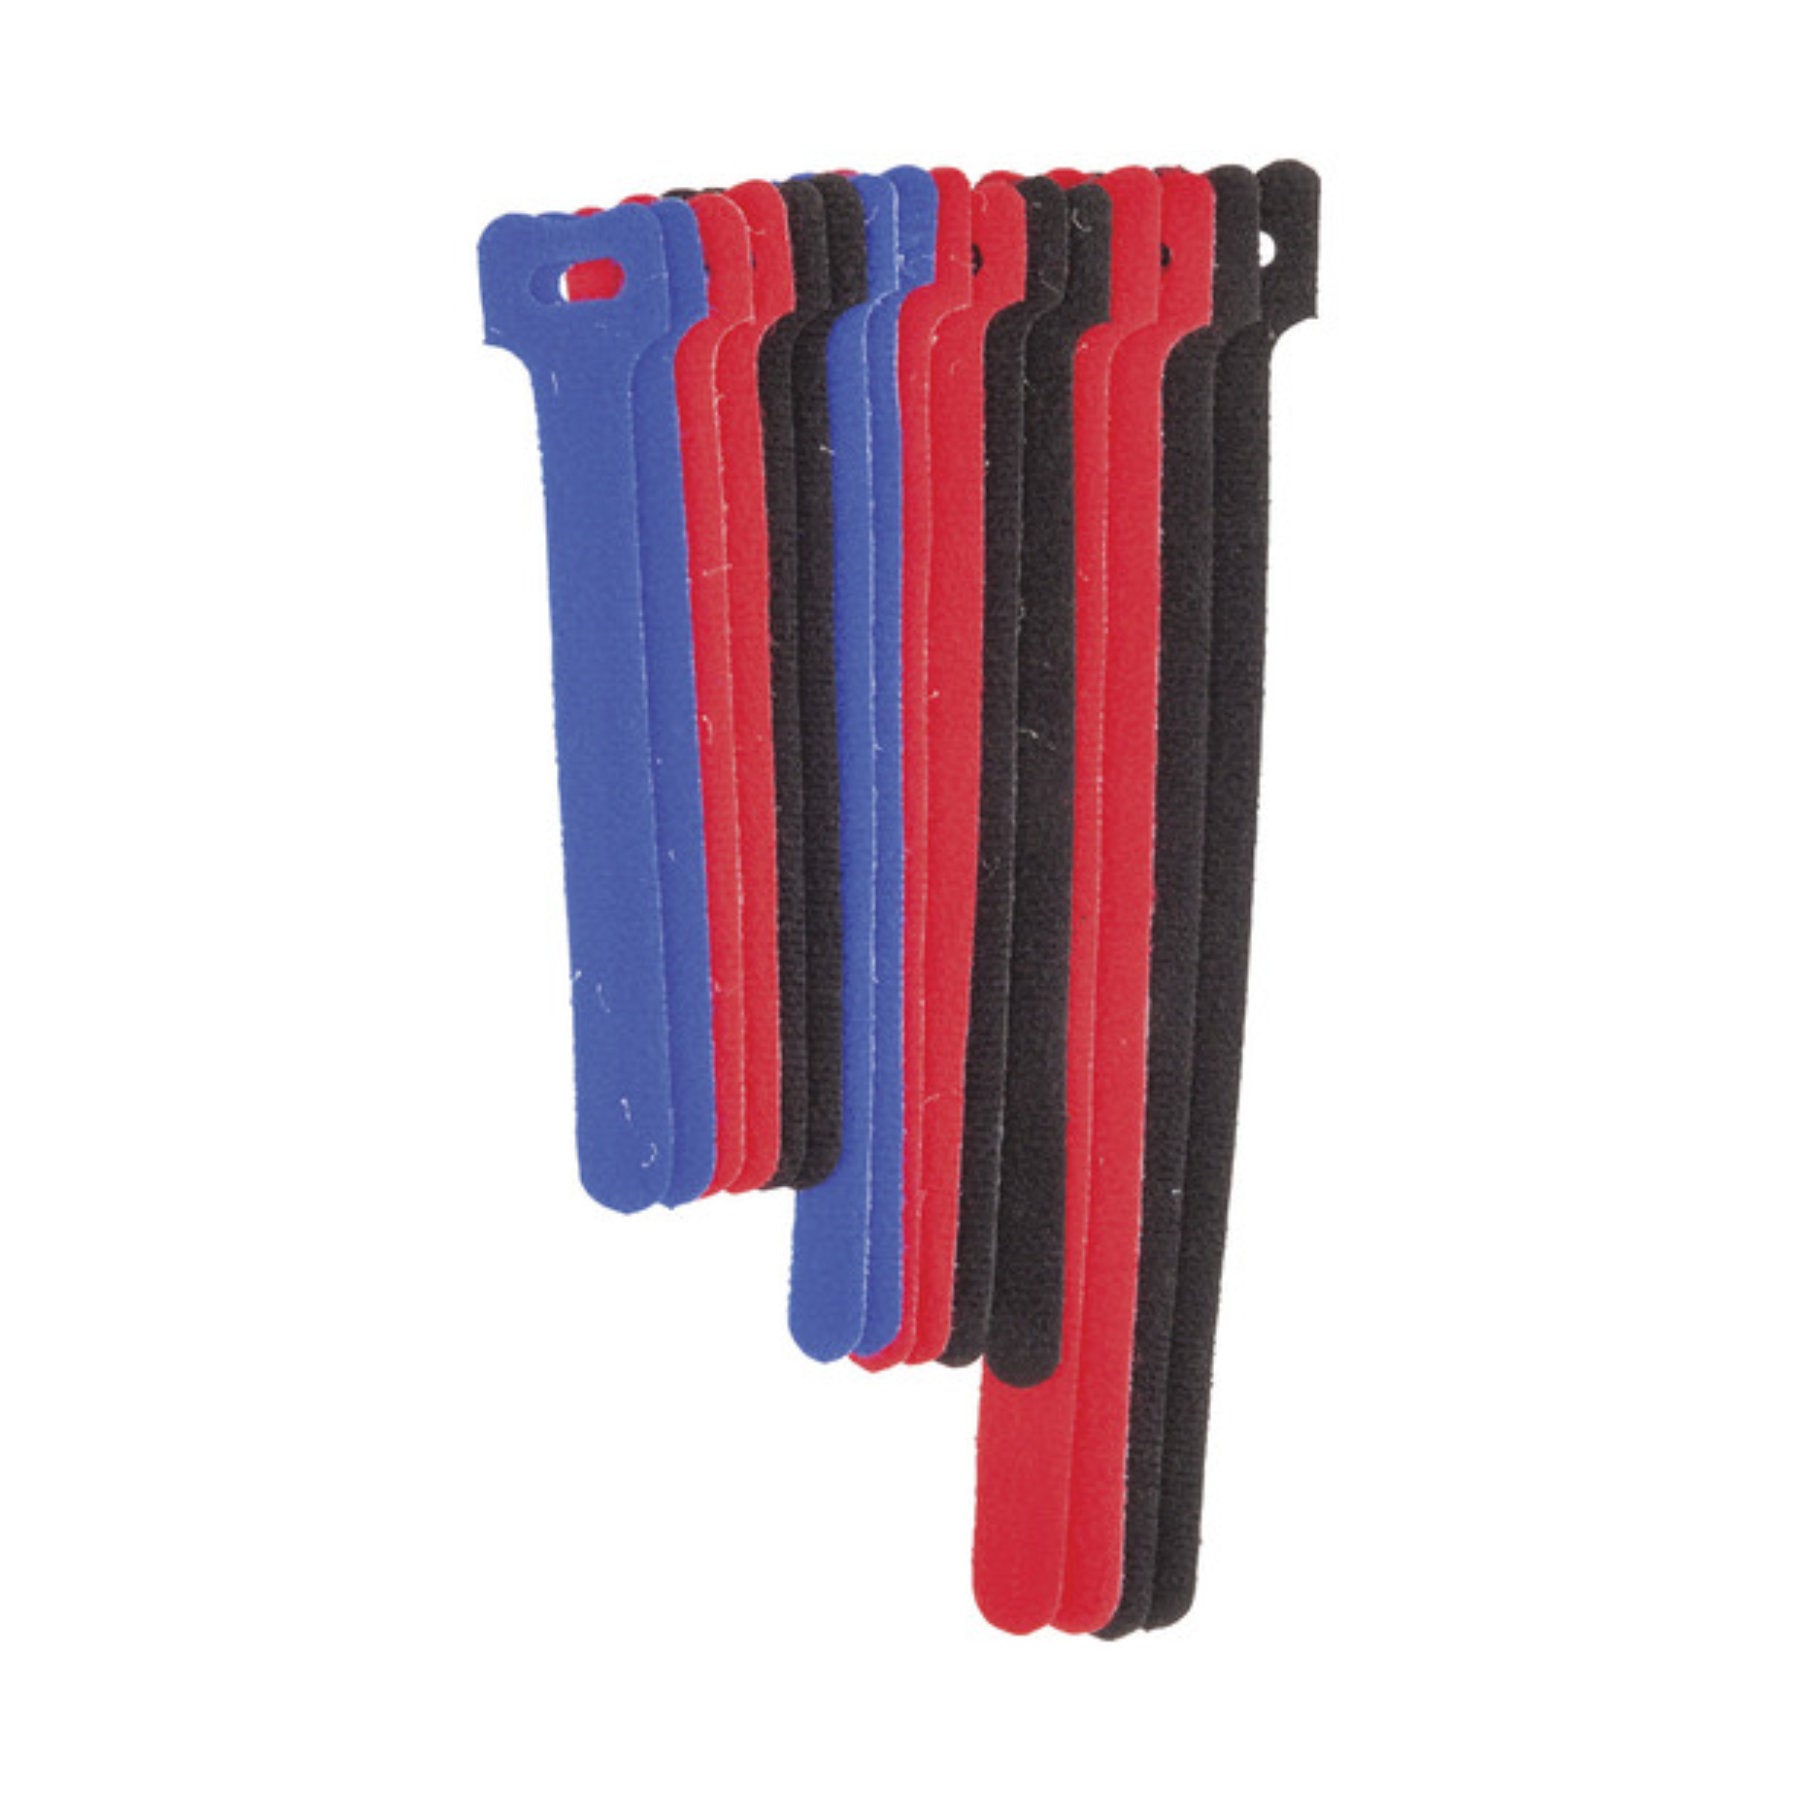 Buy Velcro Cable Ties at Topic Store